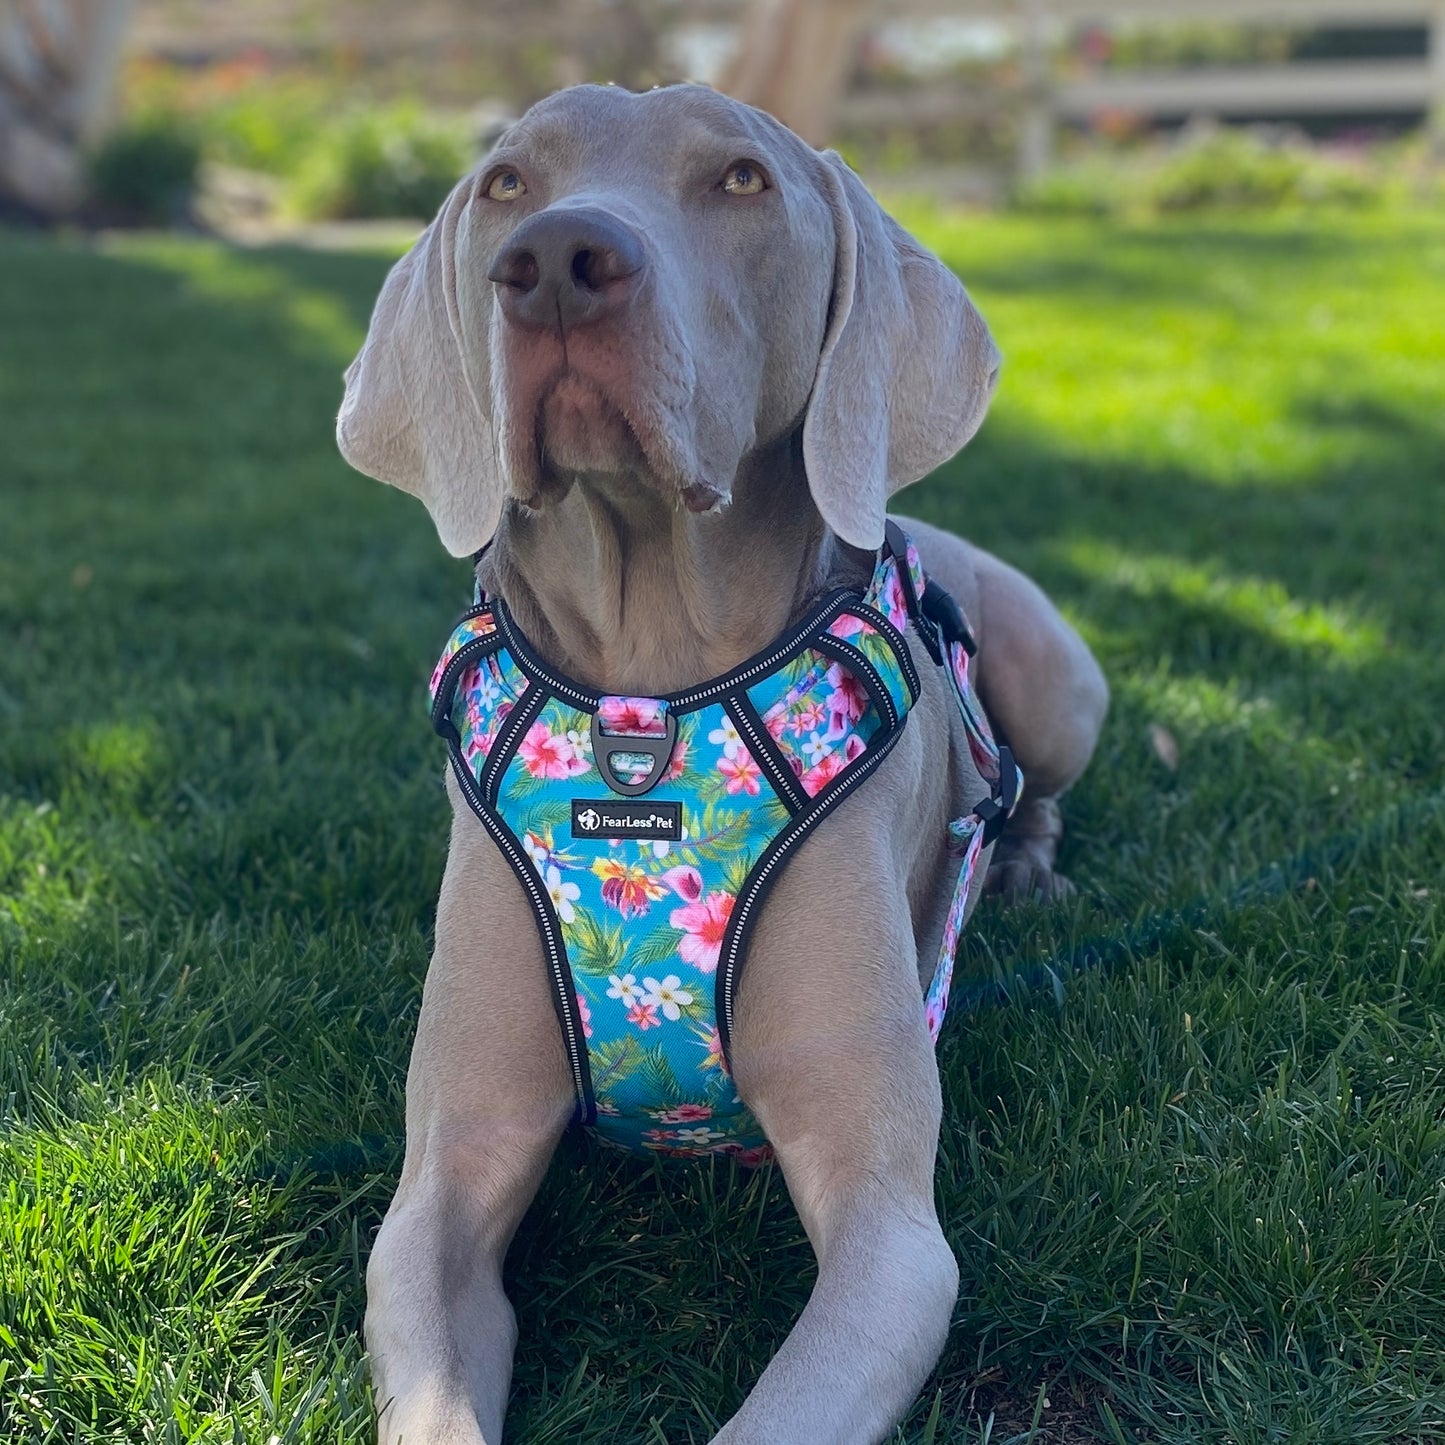 a photograph of a Weimaraner wearing a harness in a teal Hawaiian floral print from fearless pet